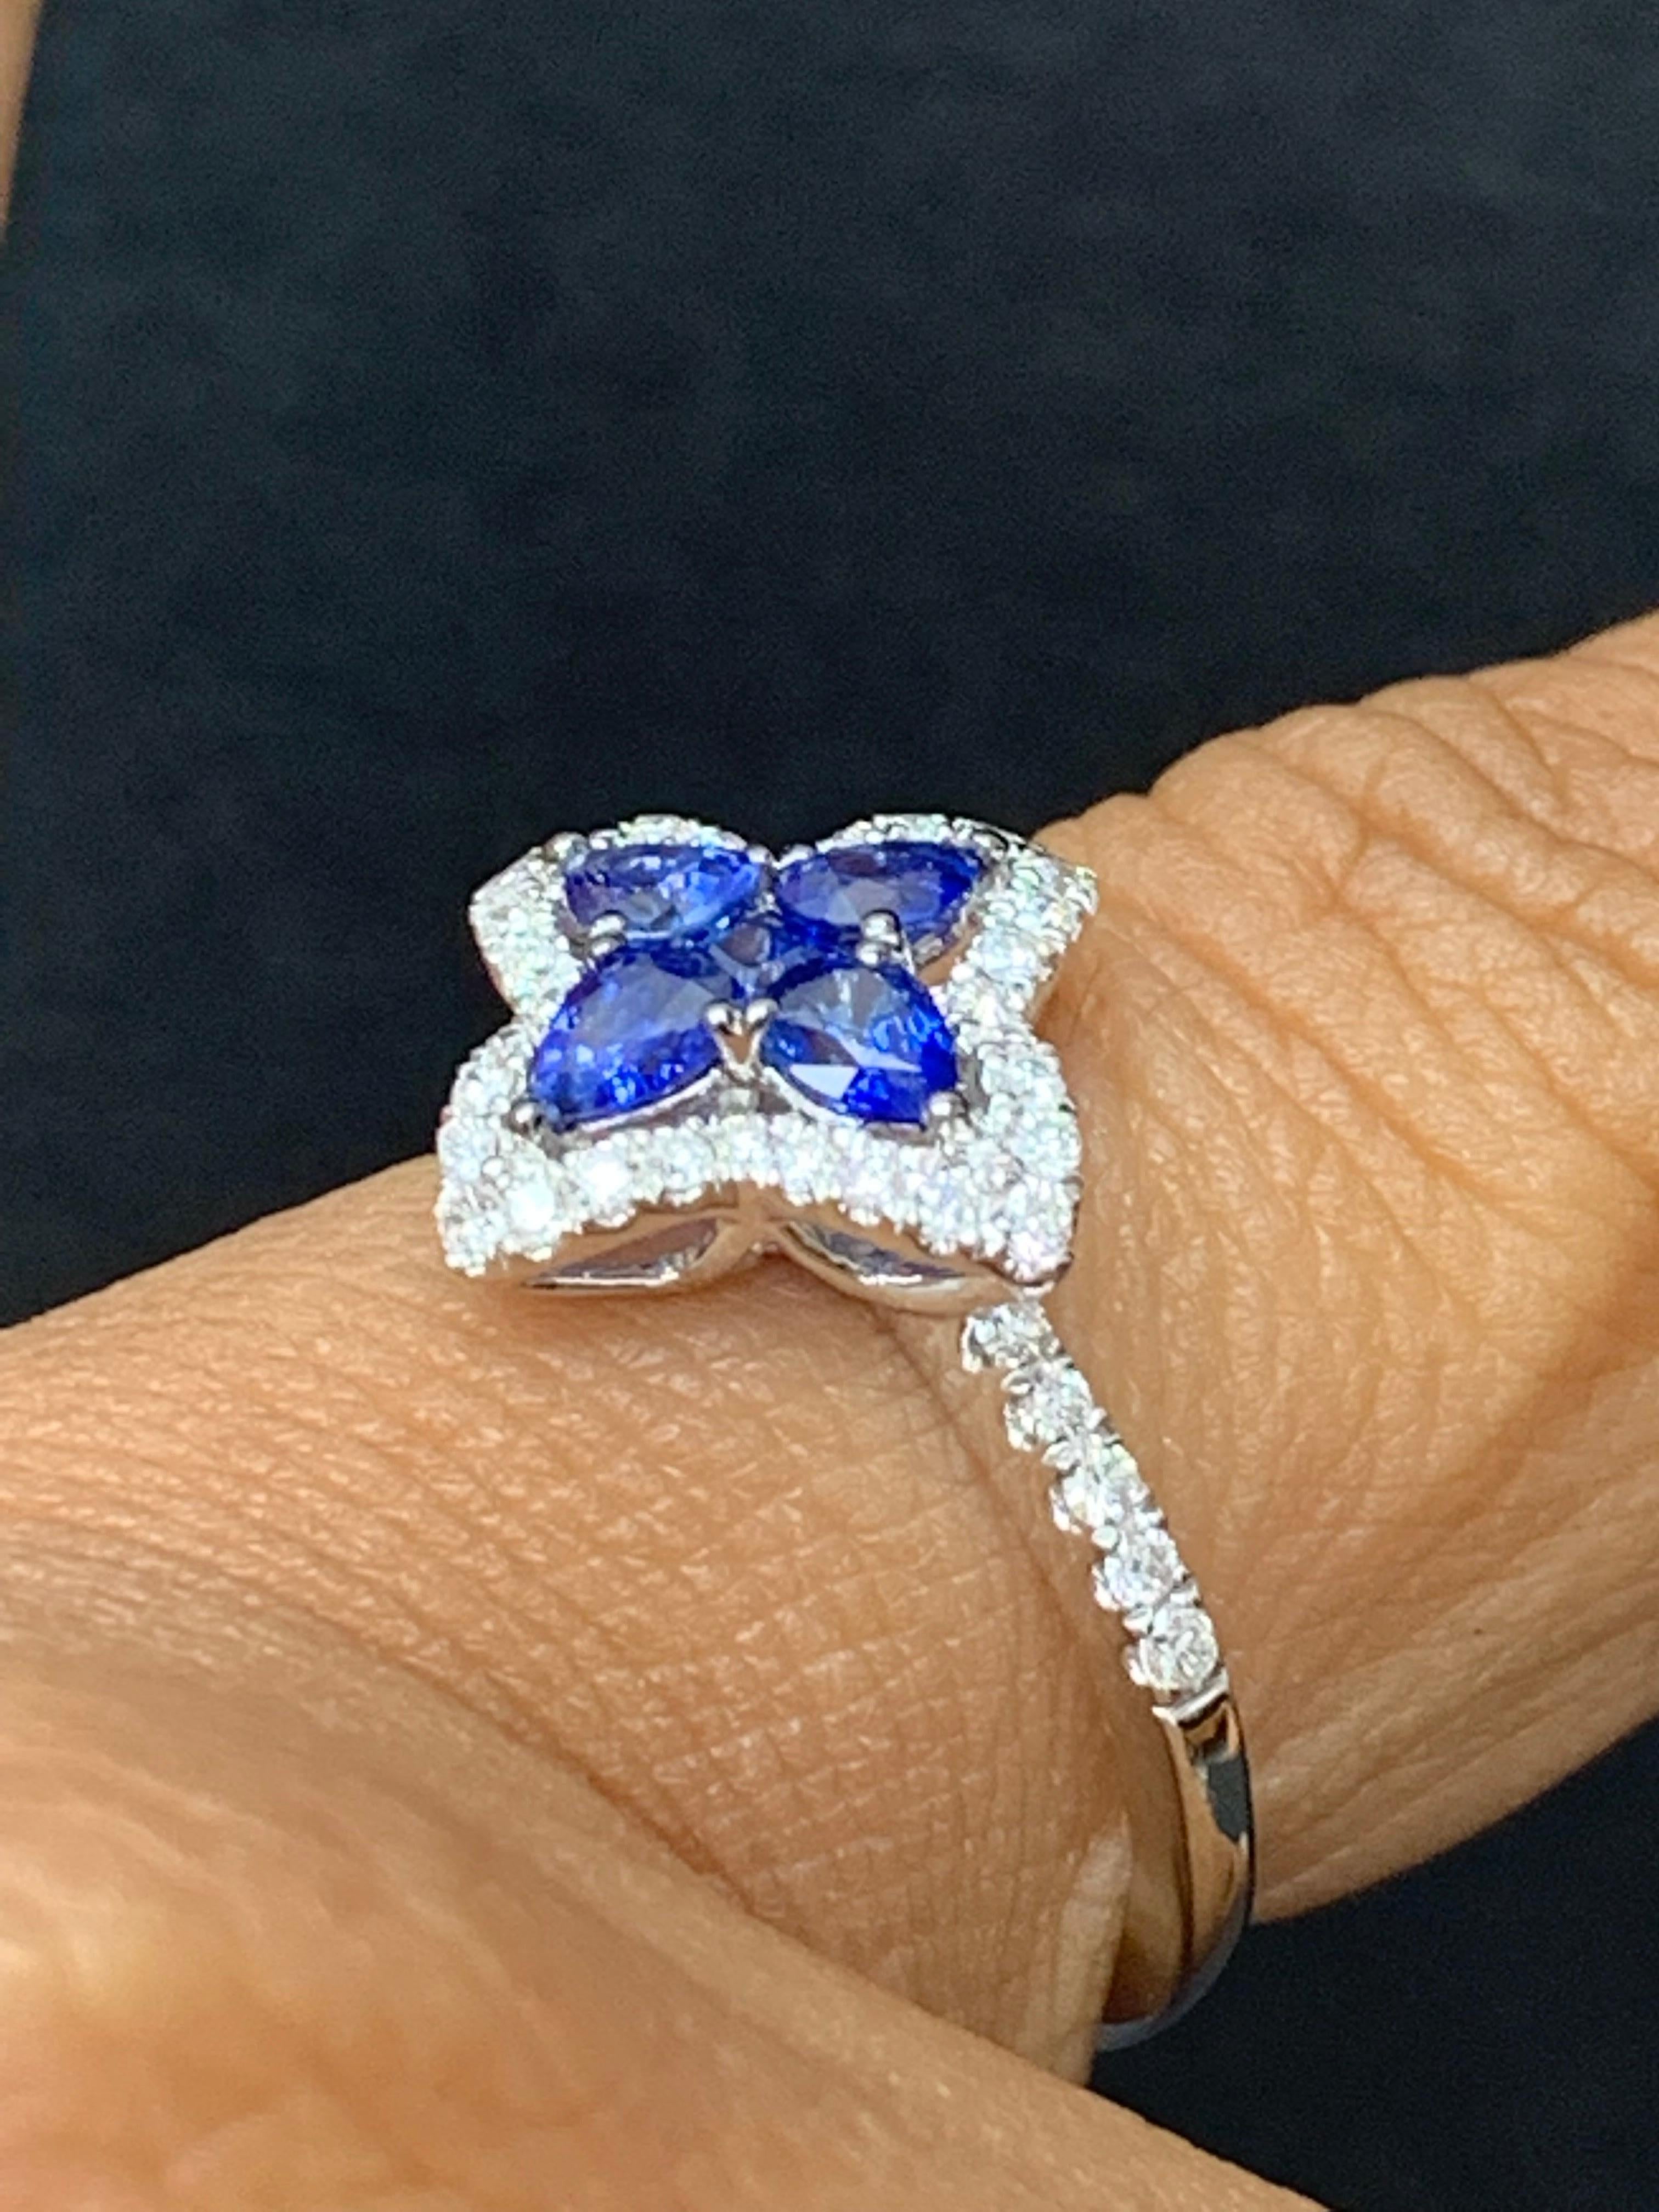 0.70 Carat Pear Shape Sapphire and Diamond Cocktail Ring in 18K White Gold For Sale 3